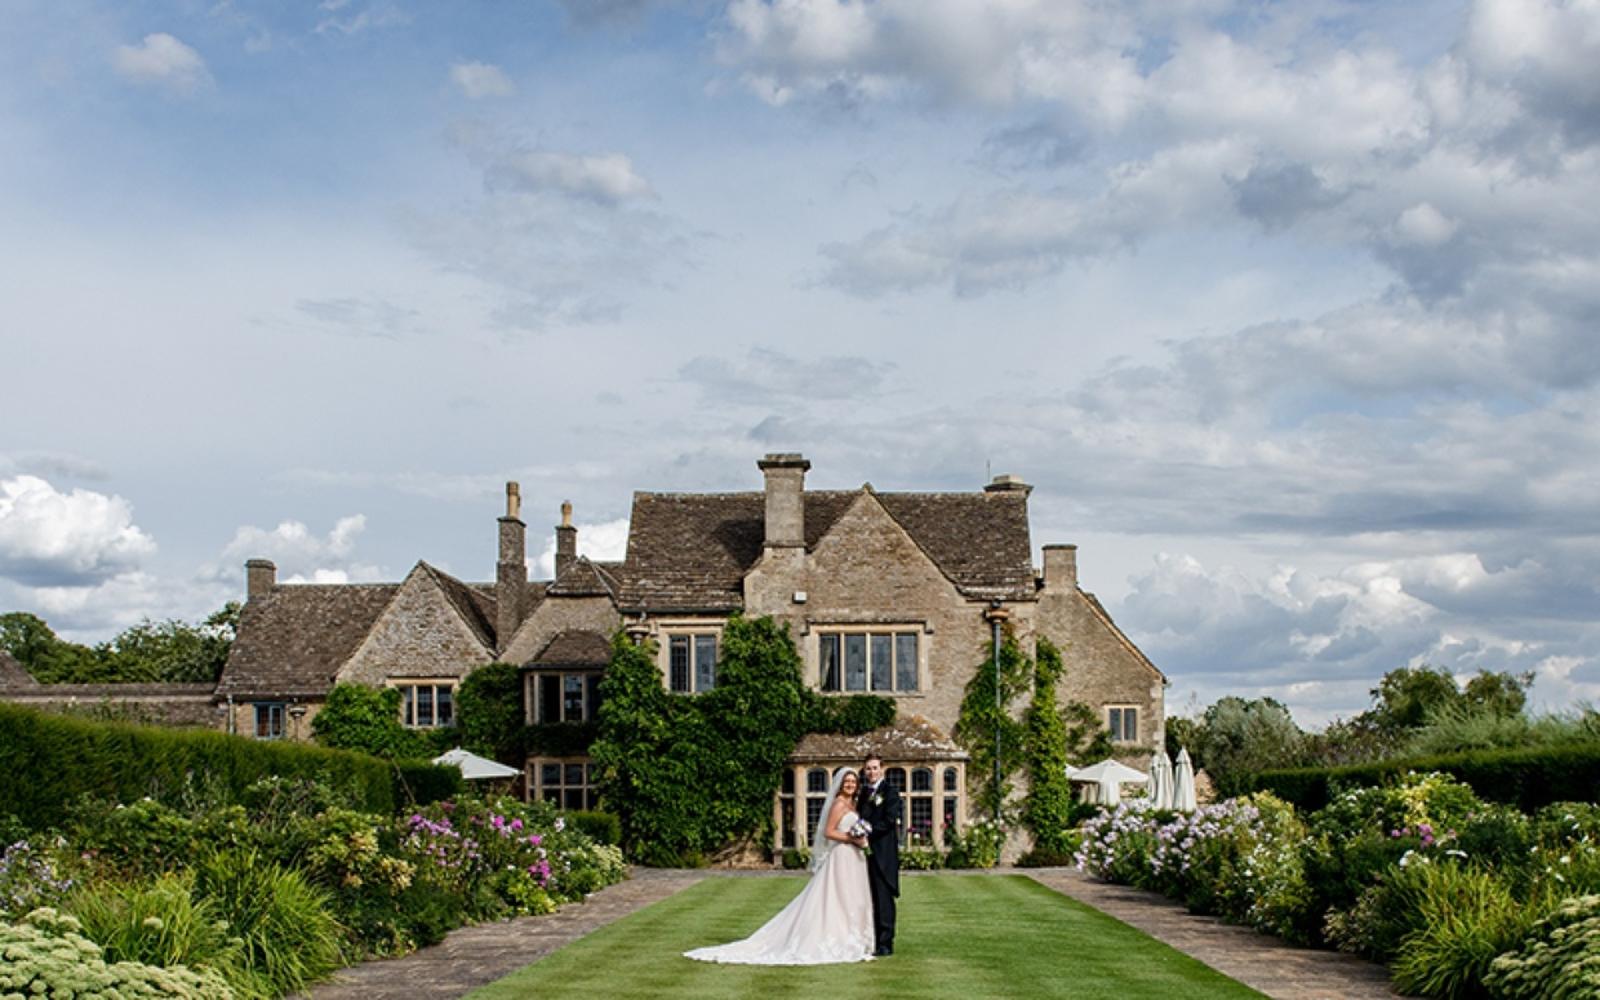 Real Wedding from Whitewed Directory approved wedding photographer duo of Cirencester Capture Every Moment intimate wedding at Whatley Manor Wiltshire